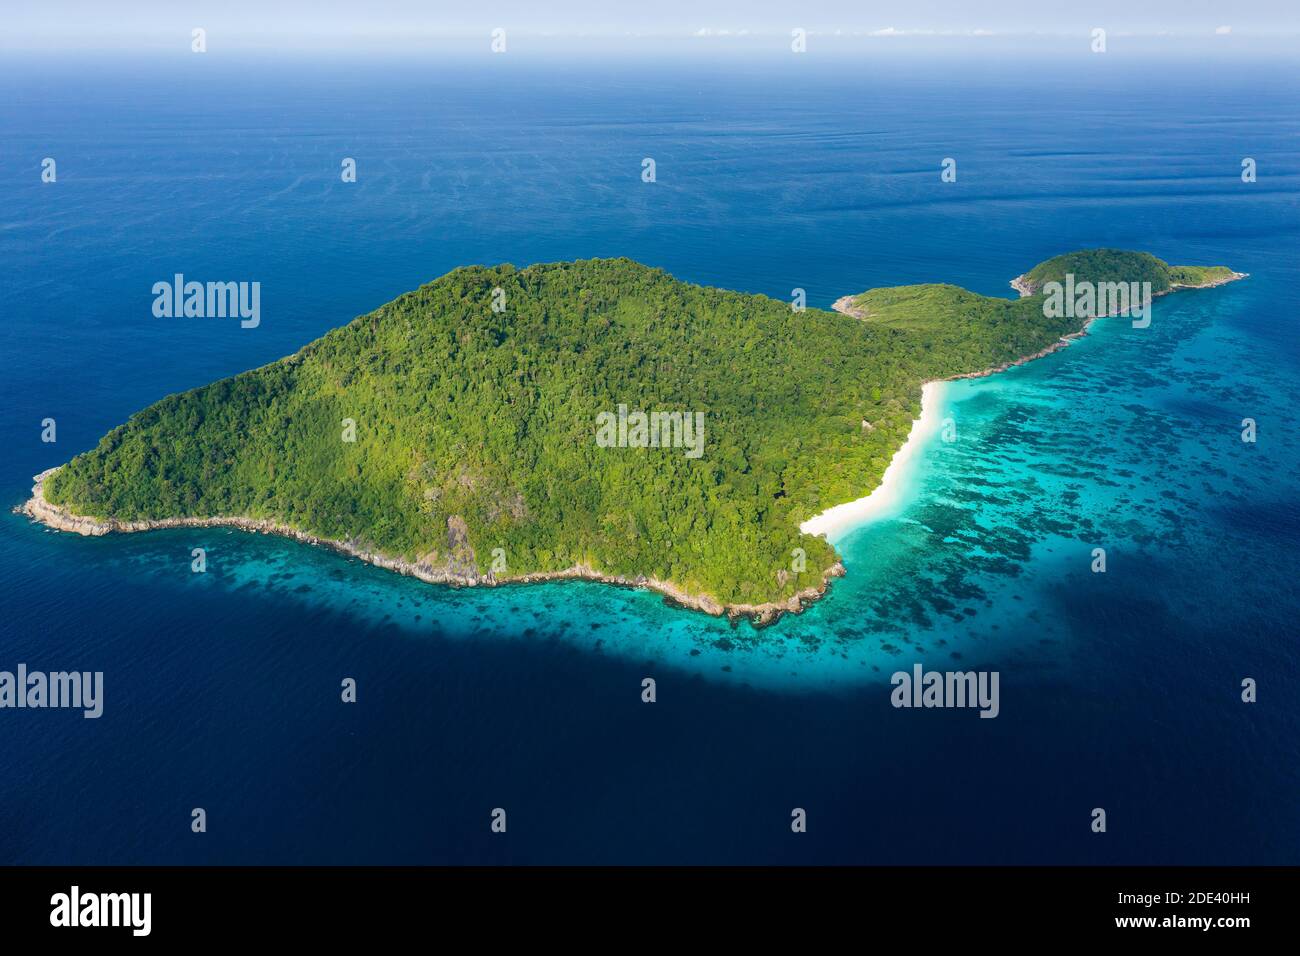 Aerial view of the beautiful tropical island of Koh Tachai in the Similan Islands, Thailand Stock Photo